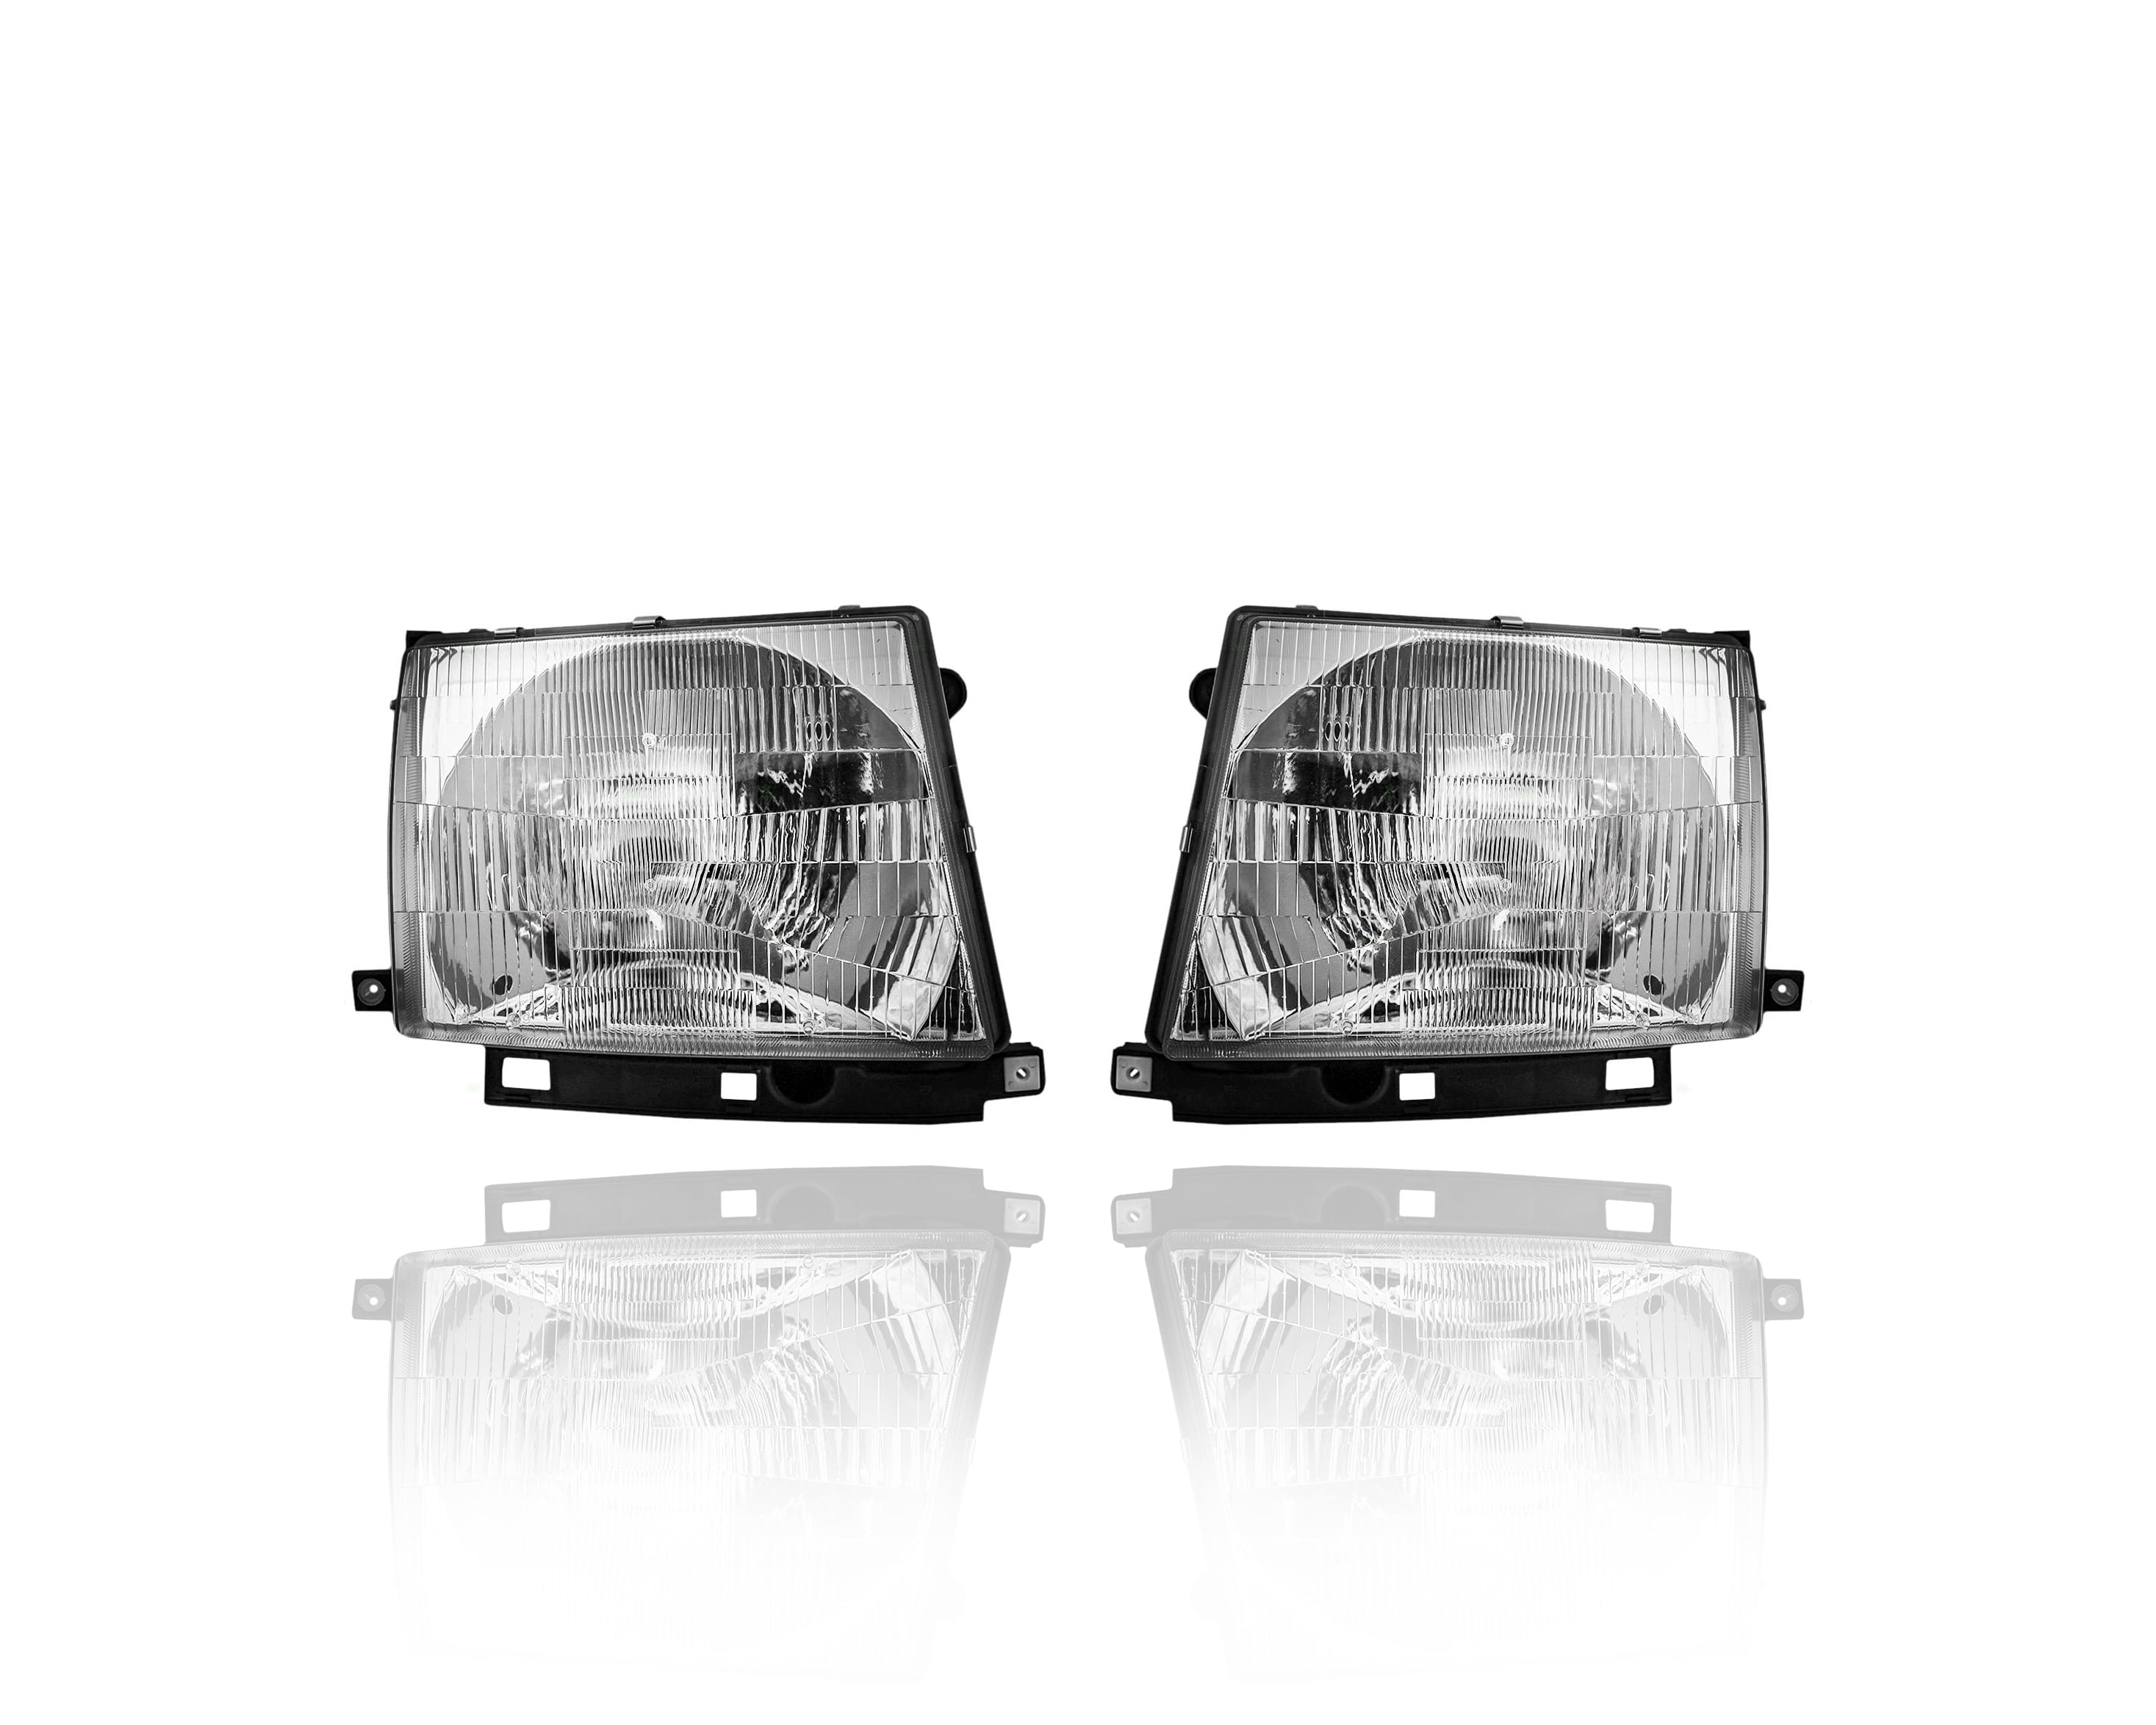 Driver and Passenger Headlights Headlamps Replacement for Toyota Tacoma Pickup Truck 8115004090 8111004090 